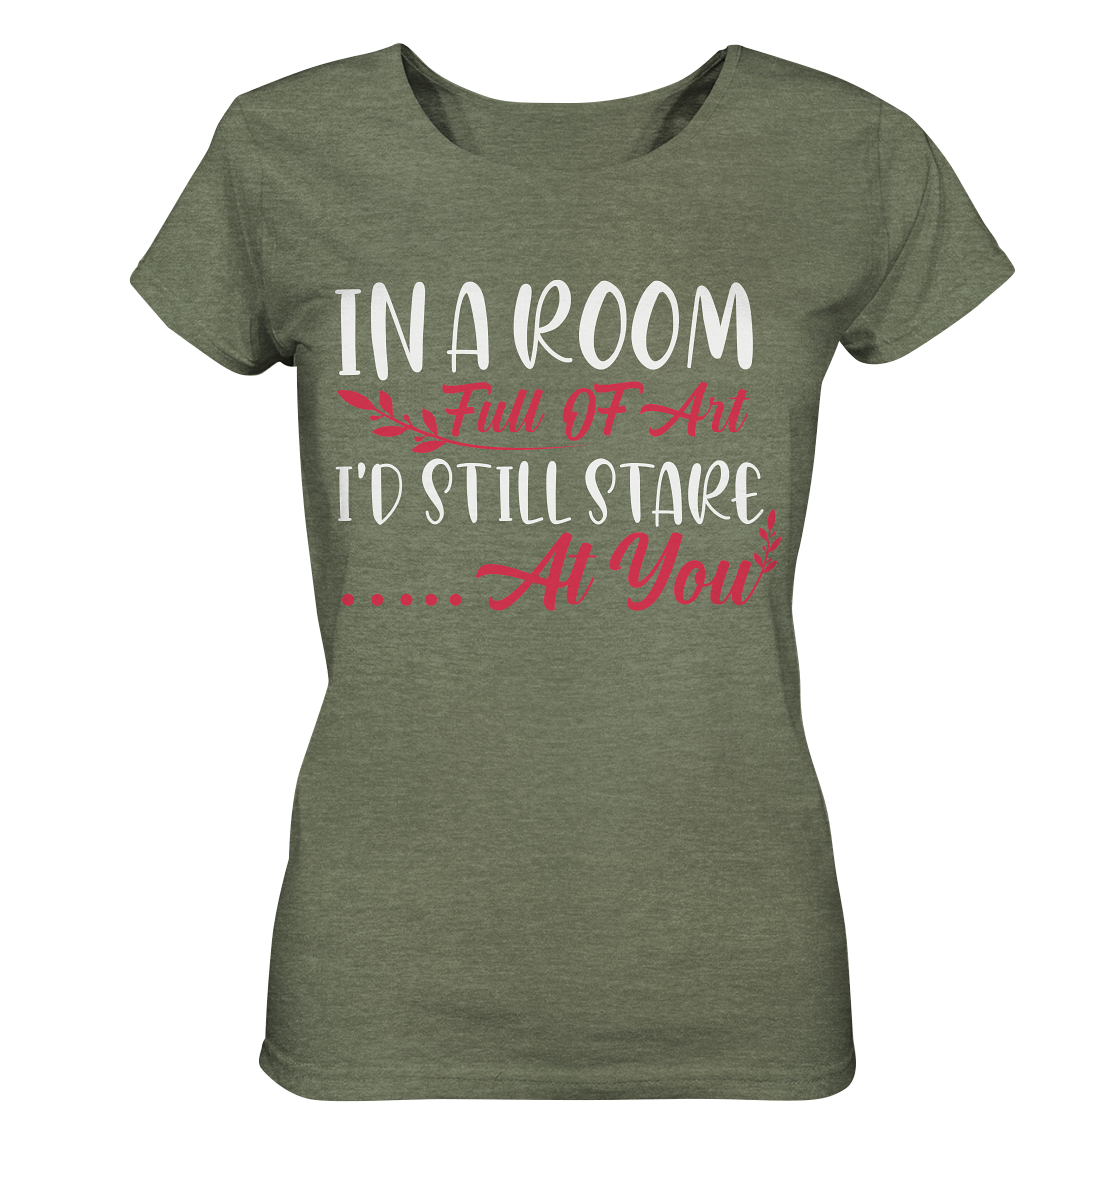 In a room full of art i´d still stare at you - Ladies Organic Shirt (meliert)